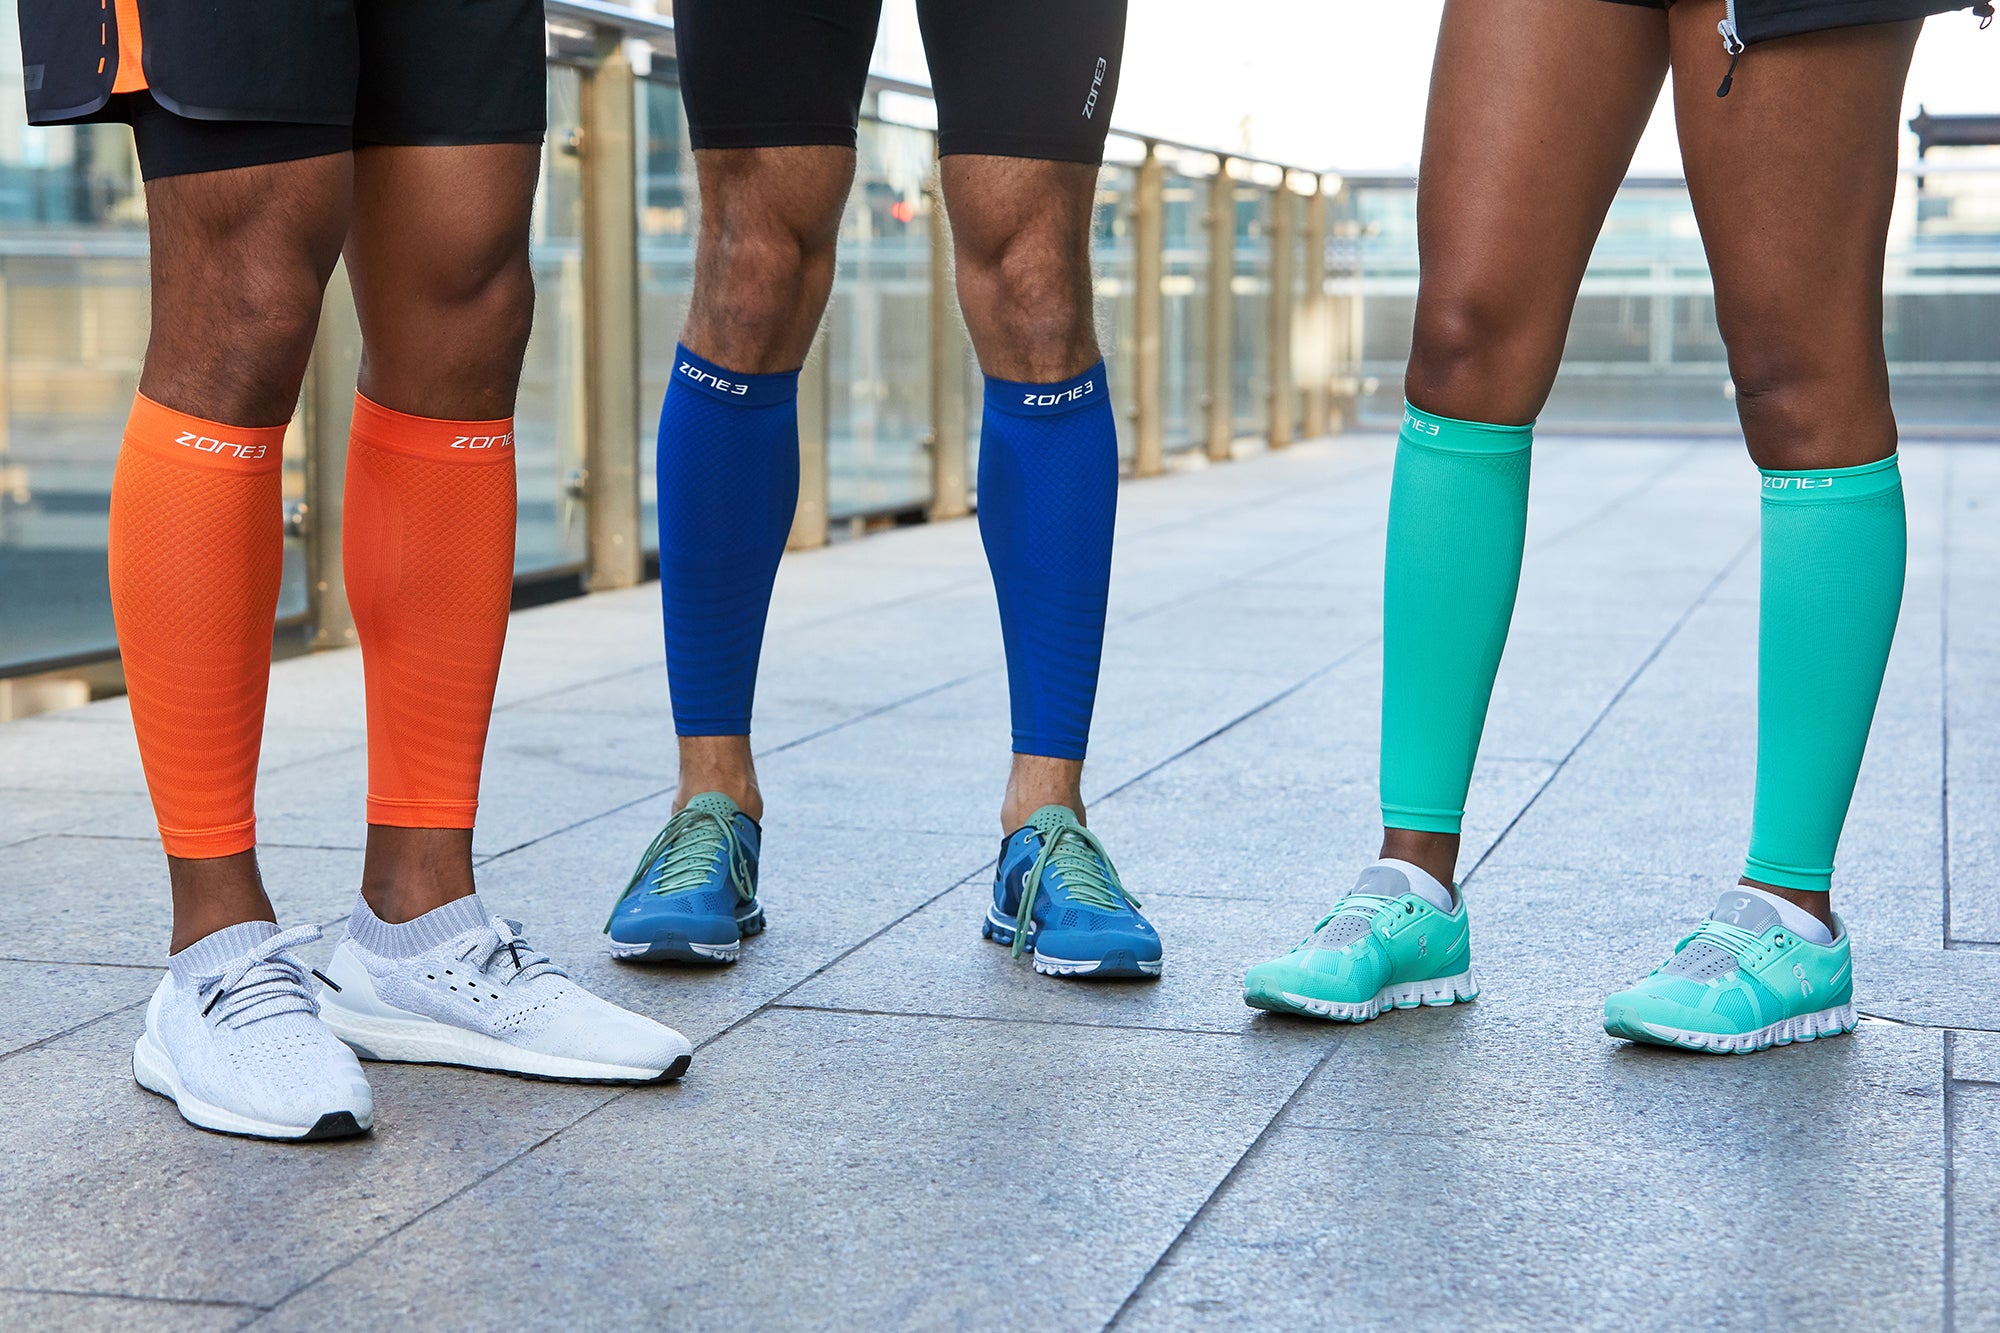 Do Calf and Leg Compression Sleeves Work?